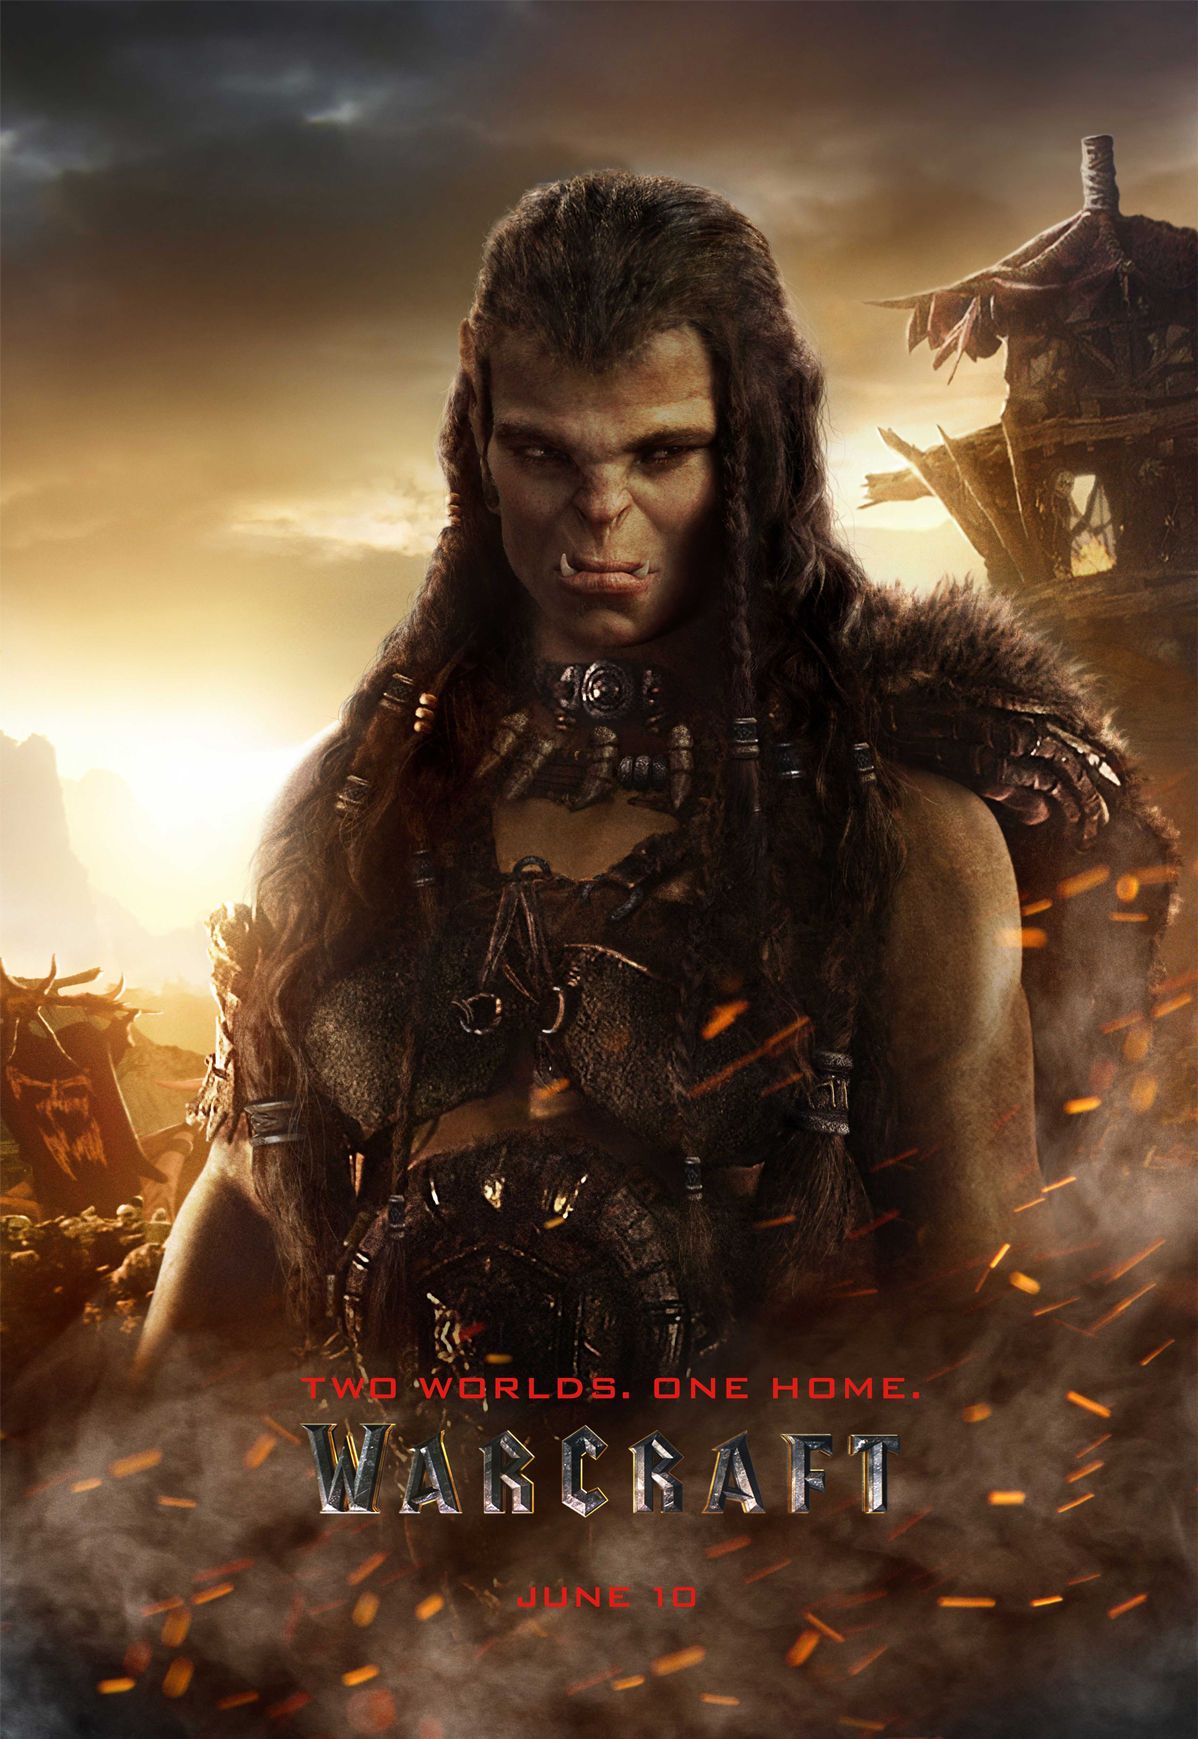 Warcraft Filmmakers Explain How To Make A Great Video Game Movie